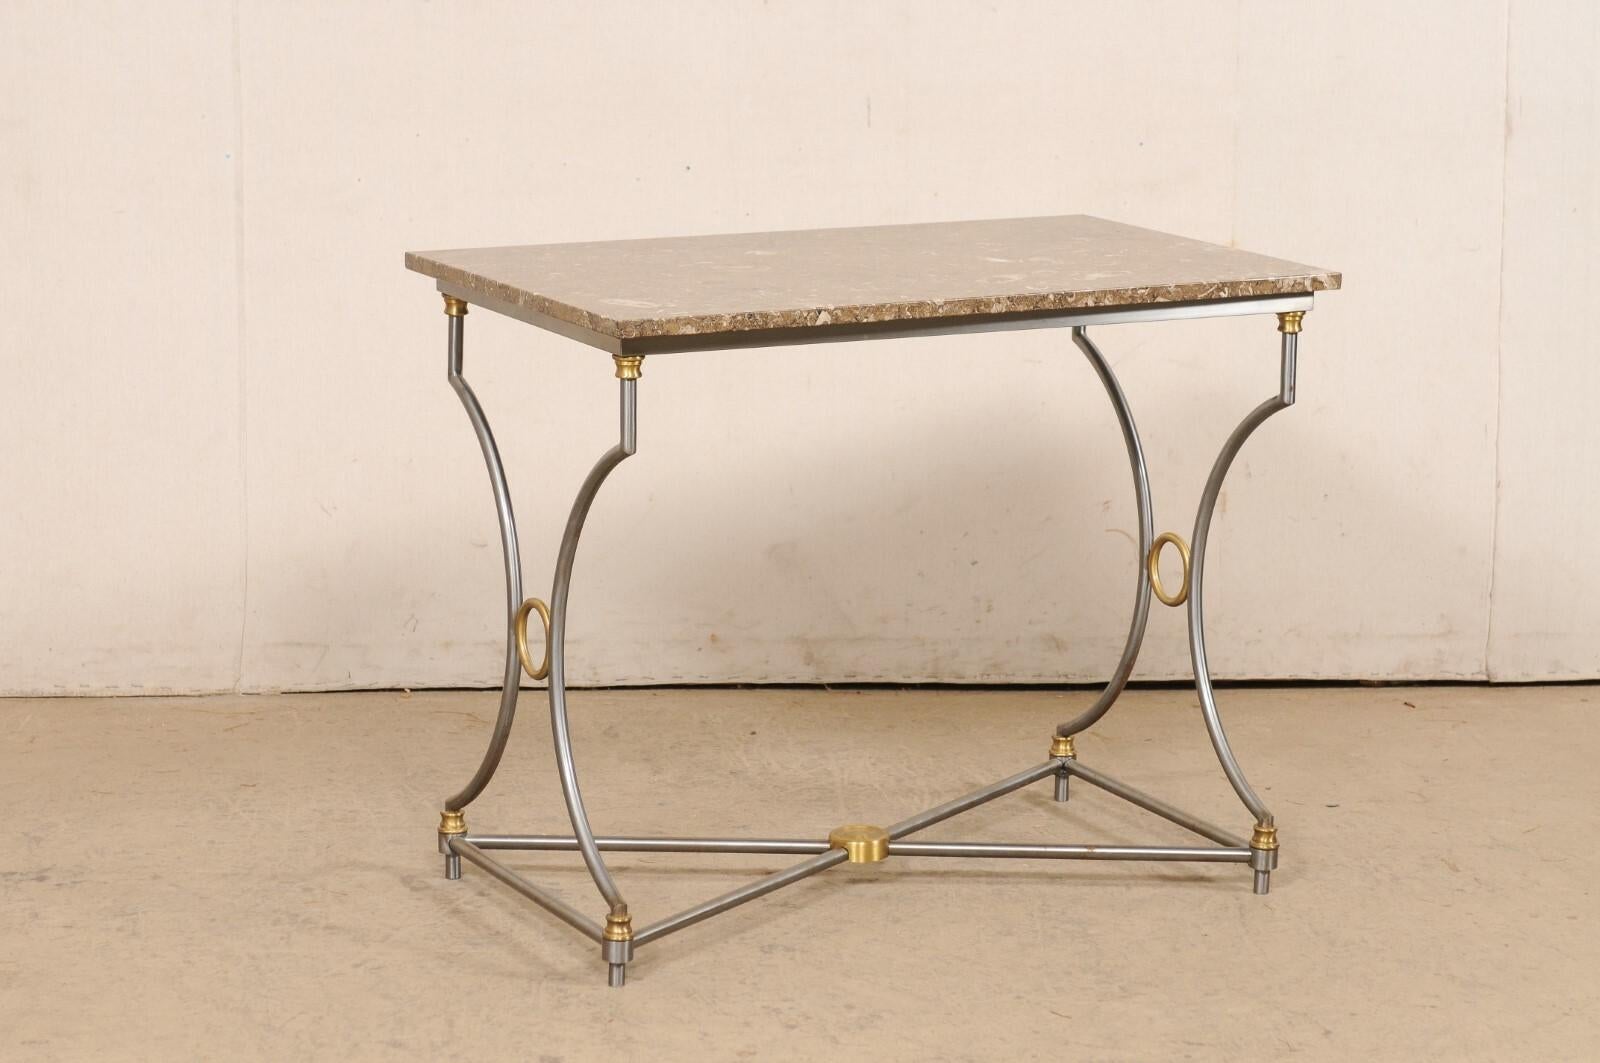 A mid-century American accent table with steel base and fossilized marble top. This American-made table, circa 1960, has a rectangular-shaped fossilized marble top, which is raised upon a steel base. The legs are comprised of a pair of round/slender